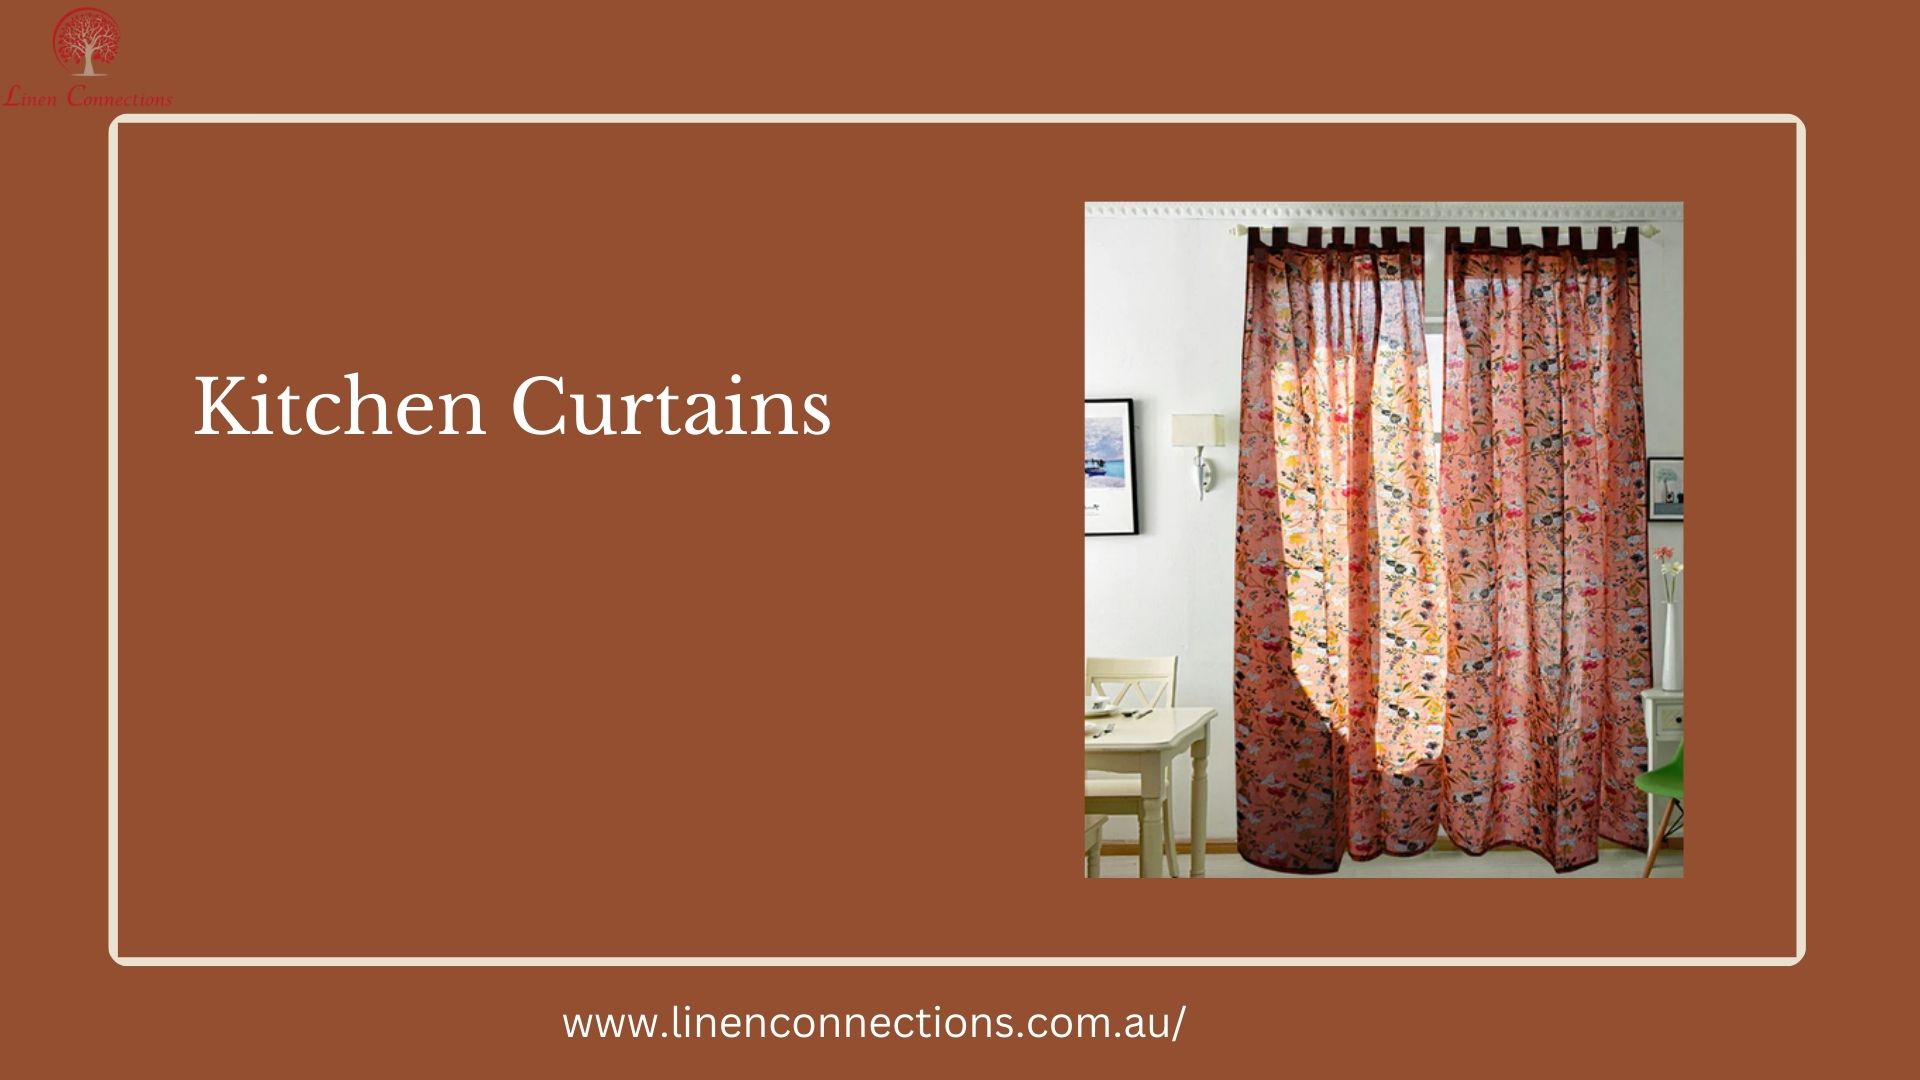 Kitchen Curtains Are The Right Combination of Design and Function. – linenconnections